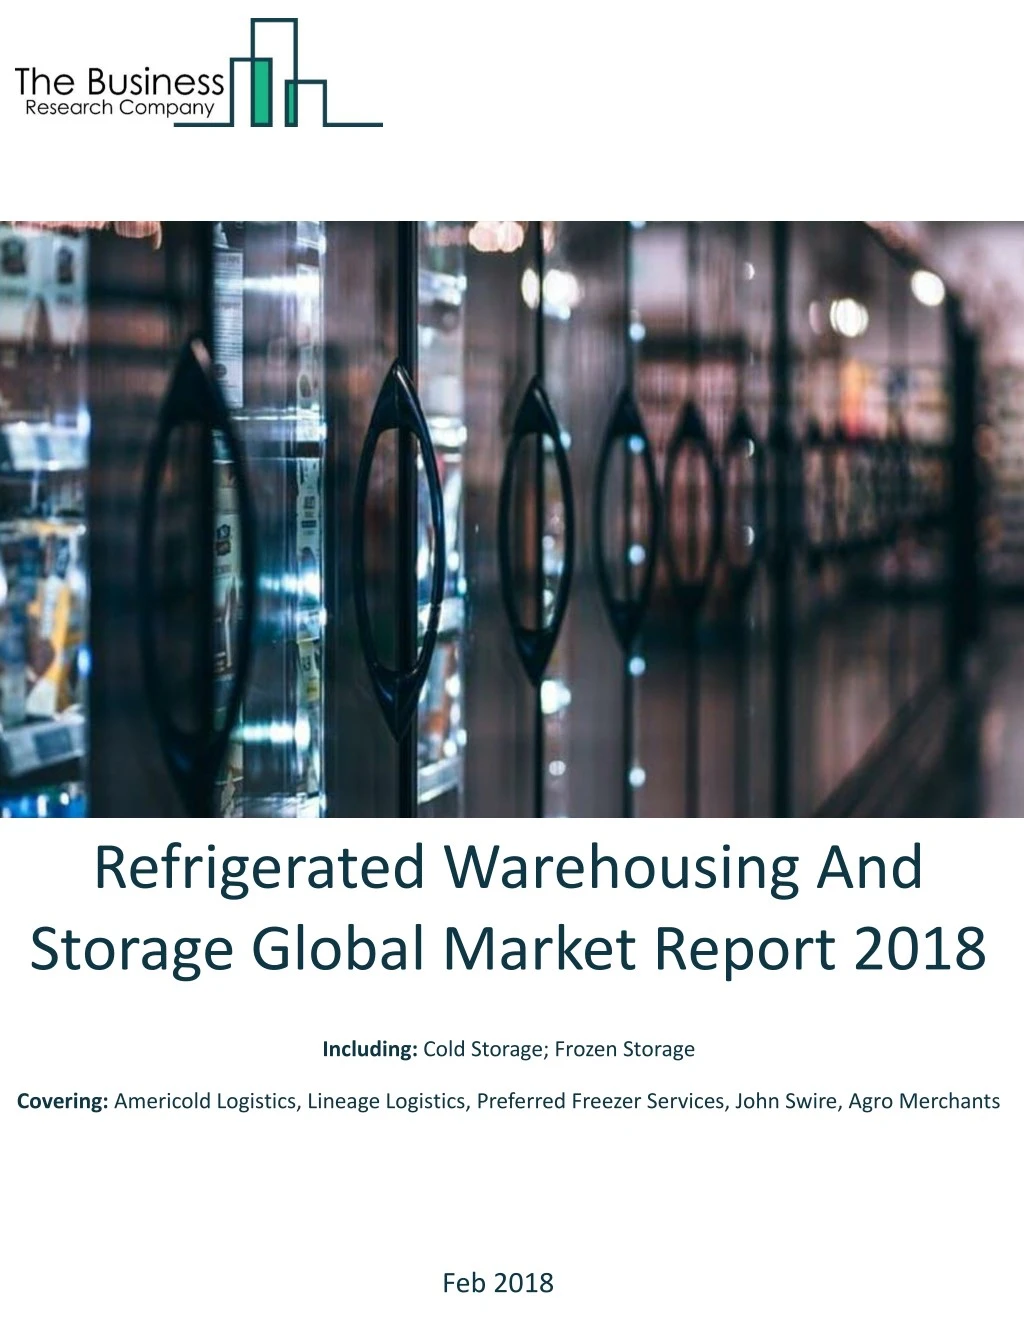 refrigerated warehousing and storage global